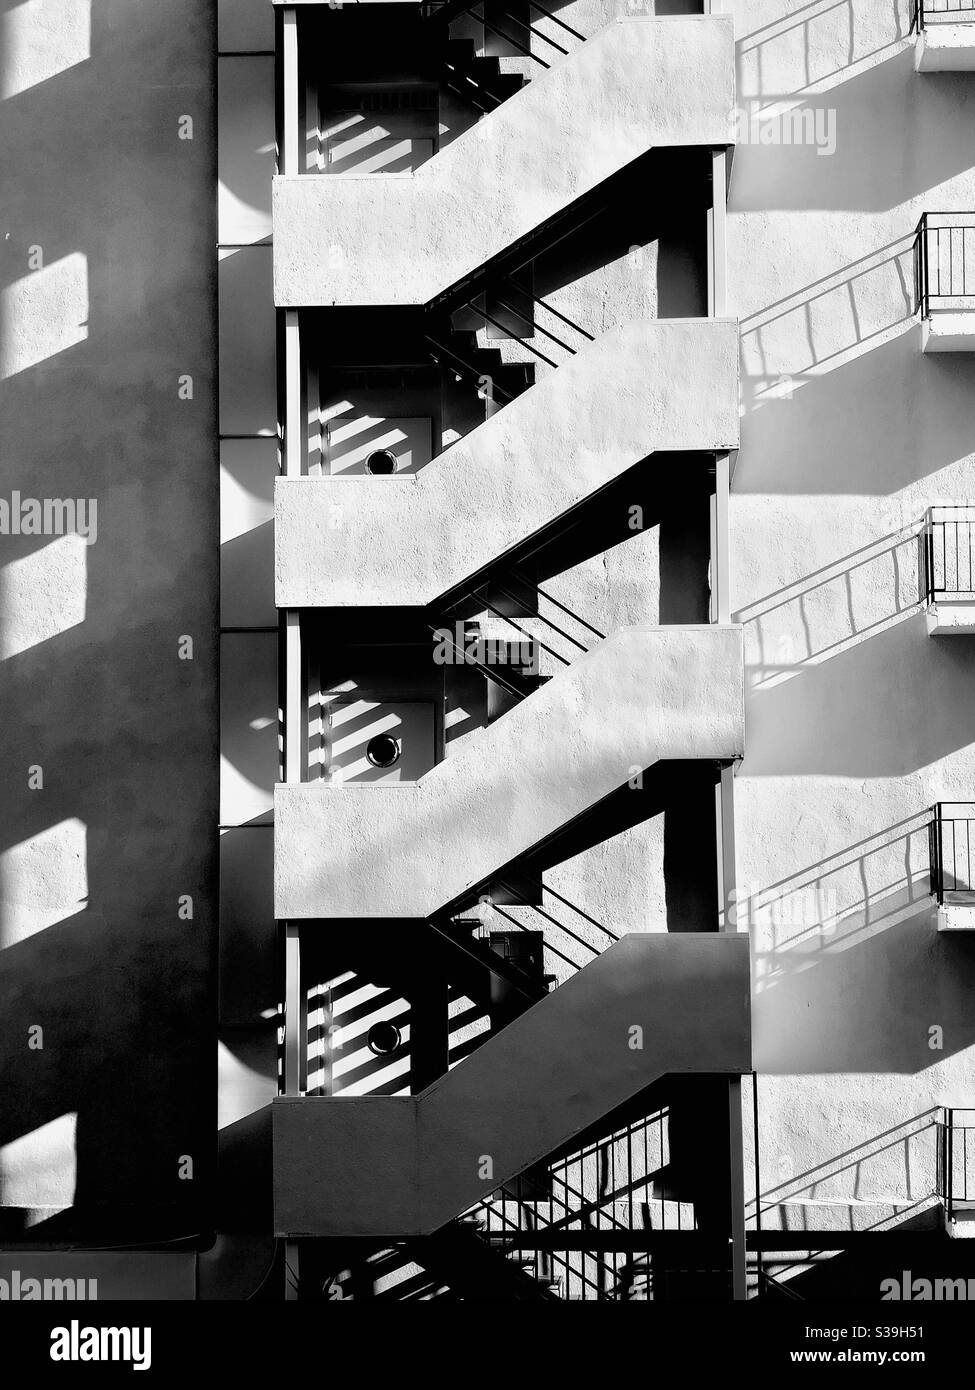 Black & white building high contrast, geometric- light and shadows Stock Photo